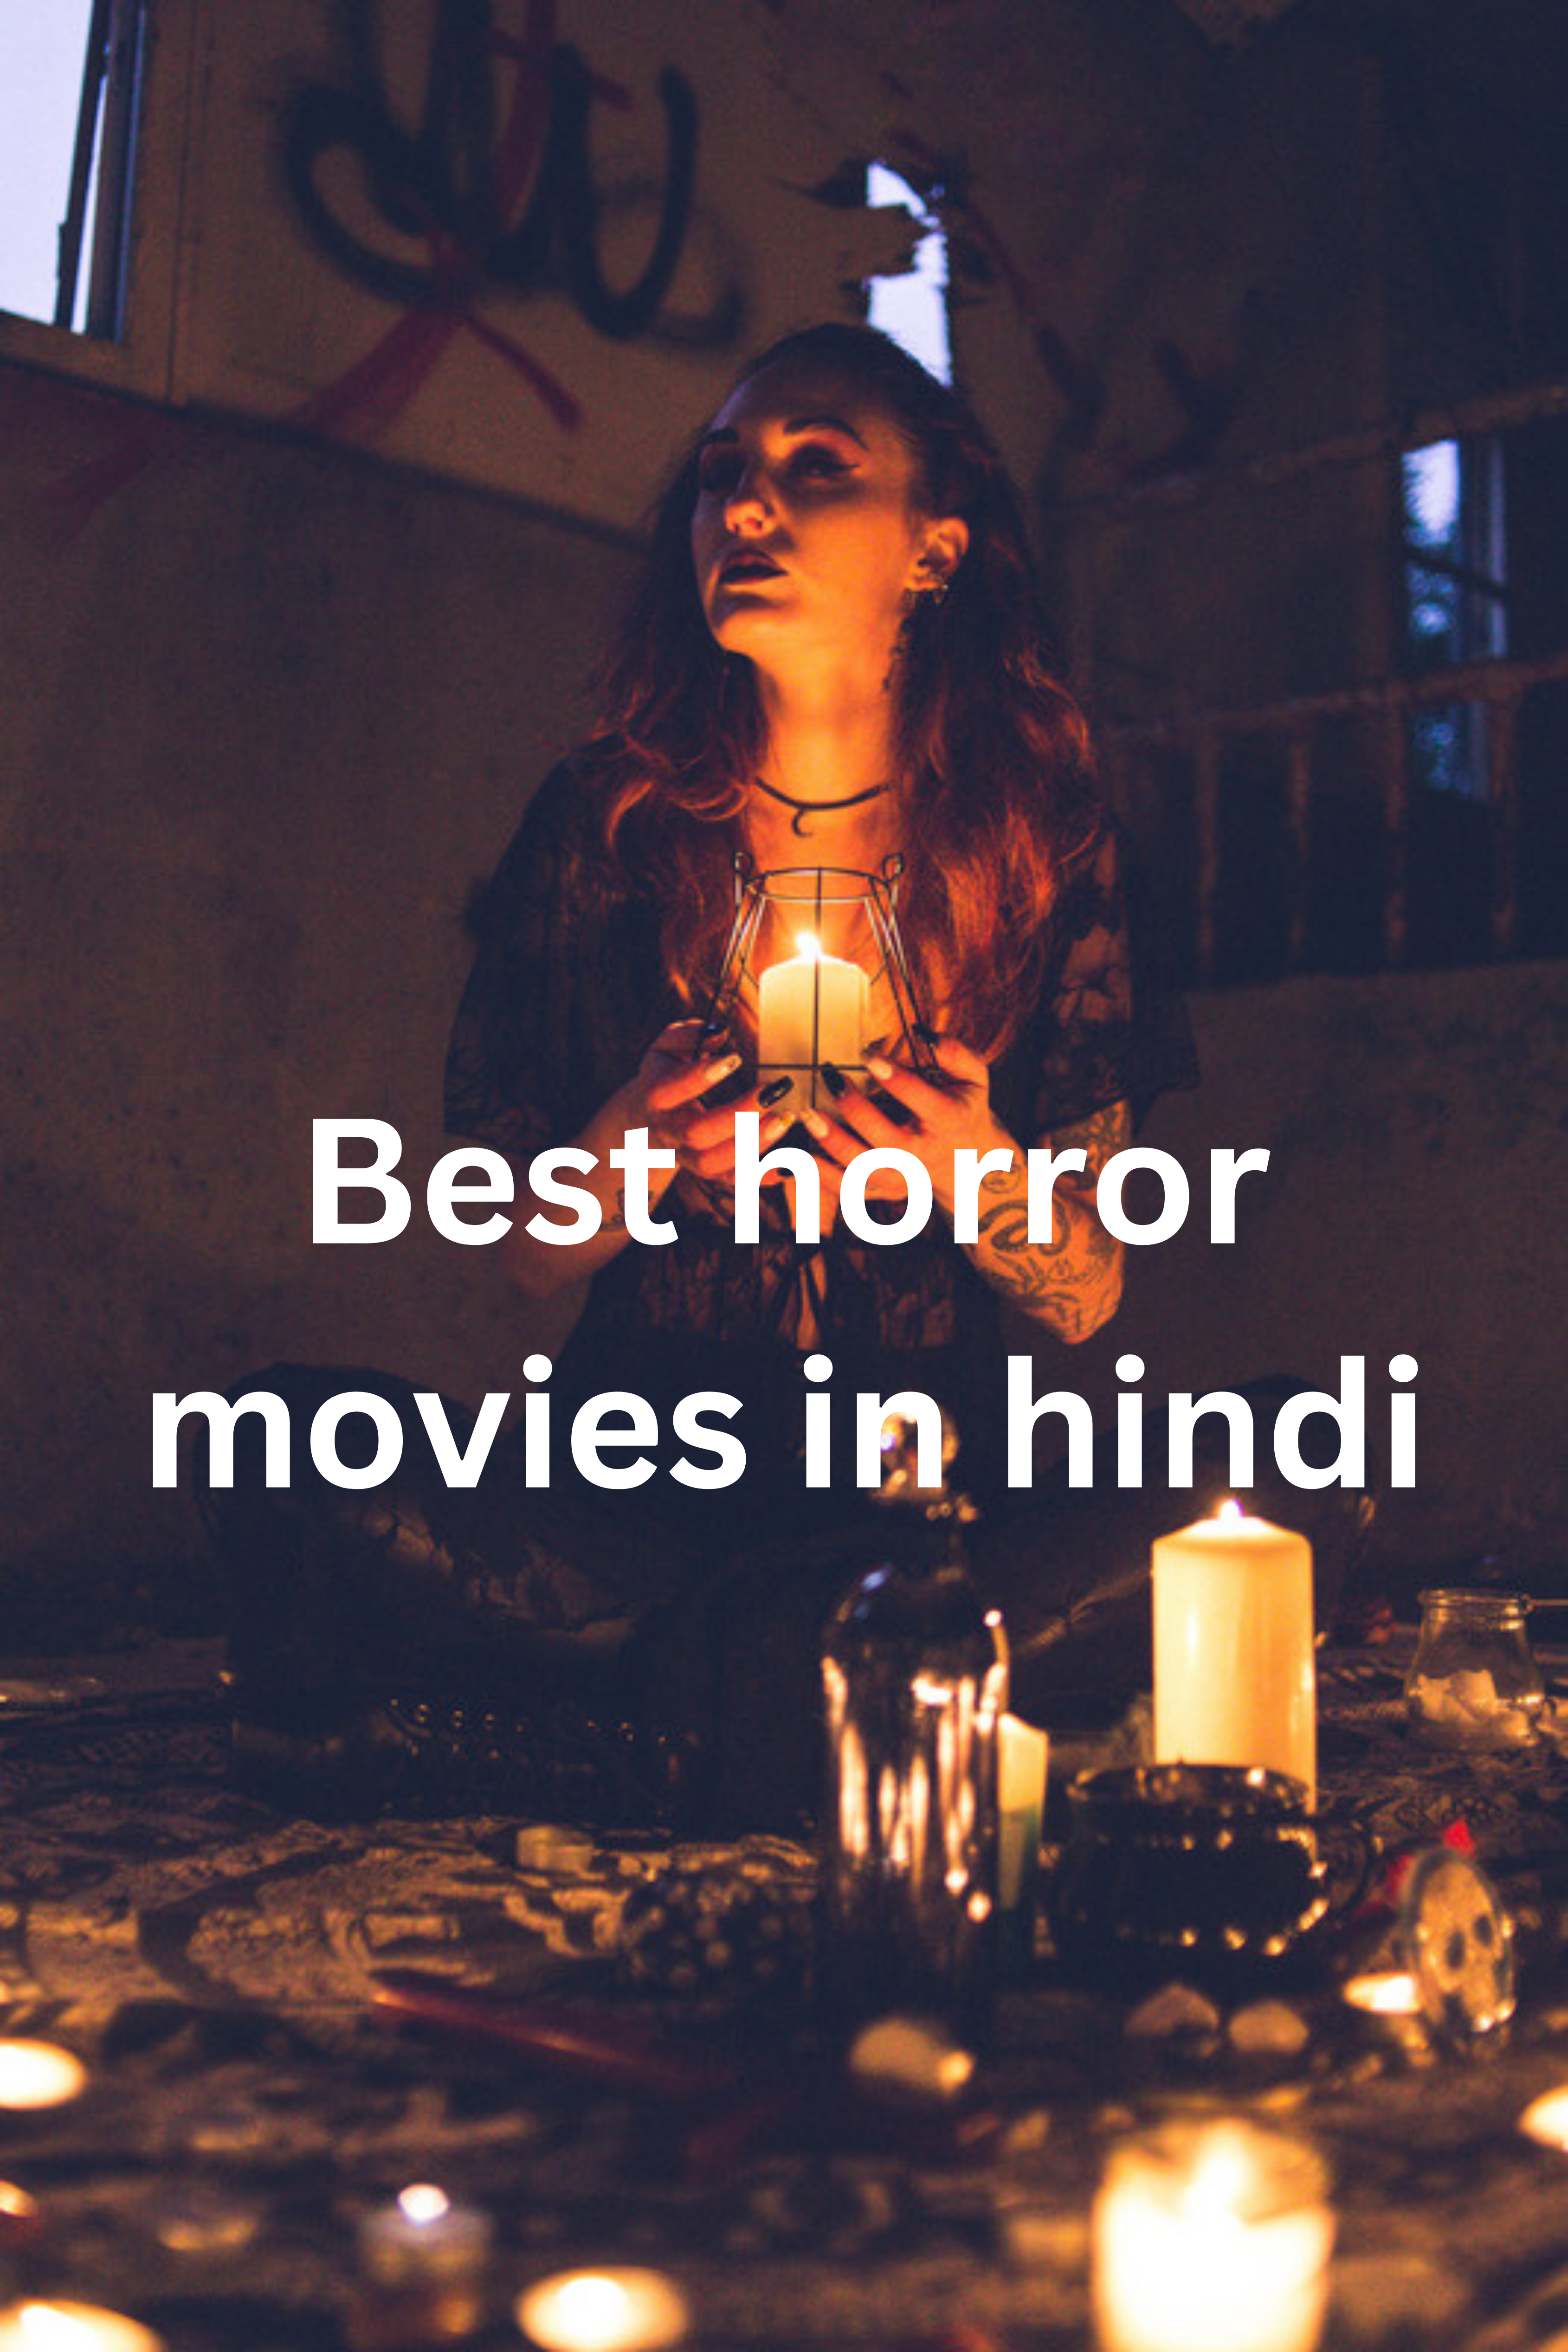 Best horror movies in hindi